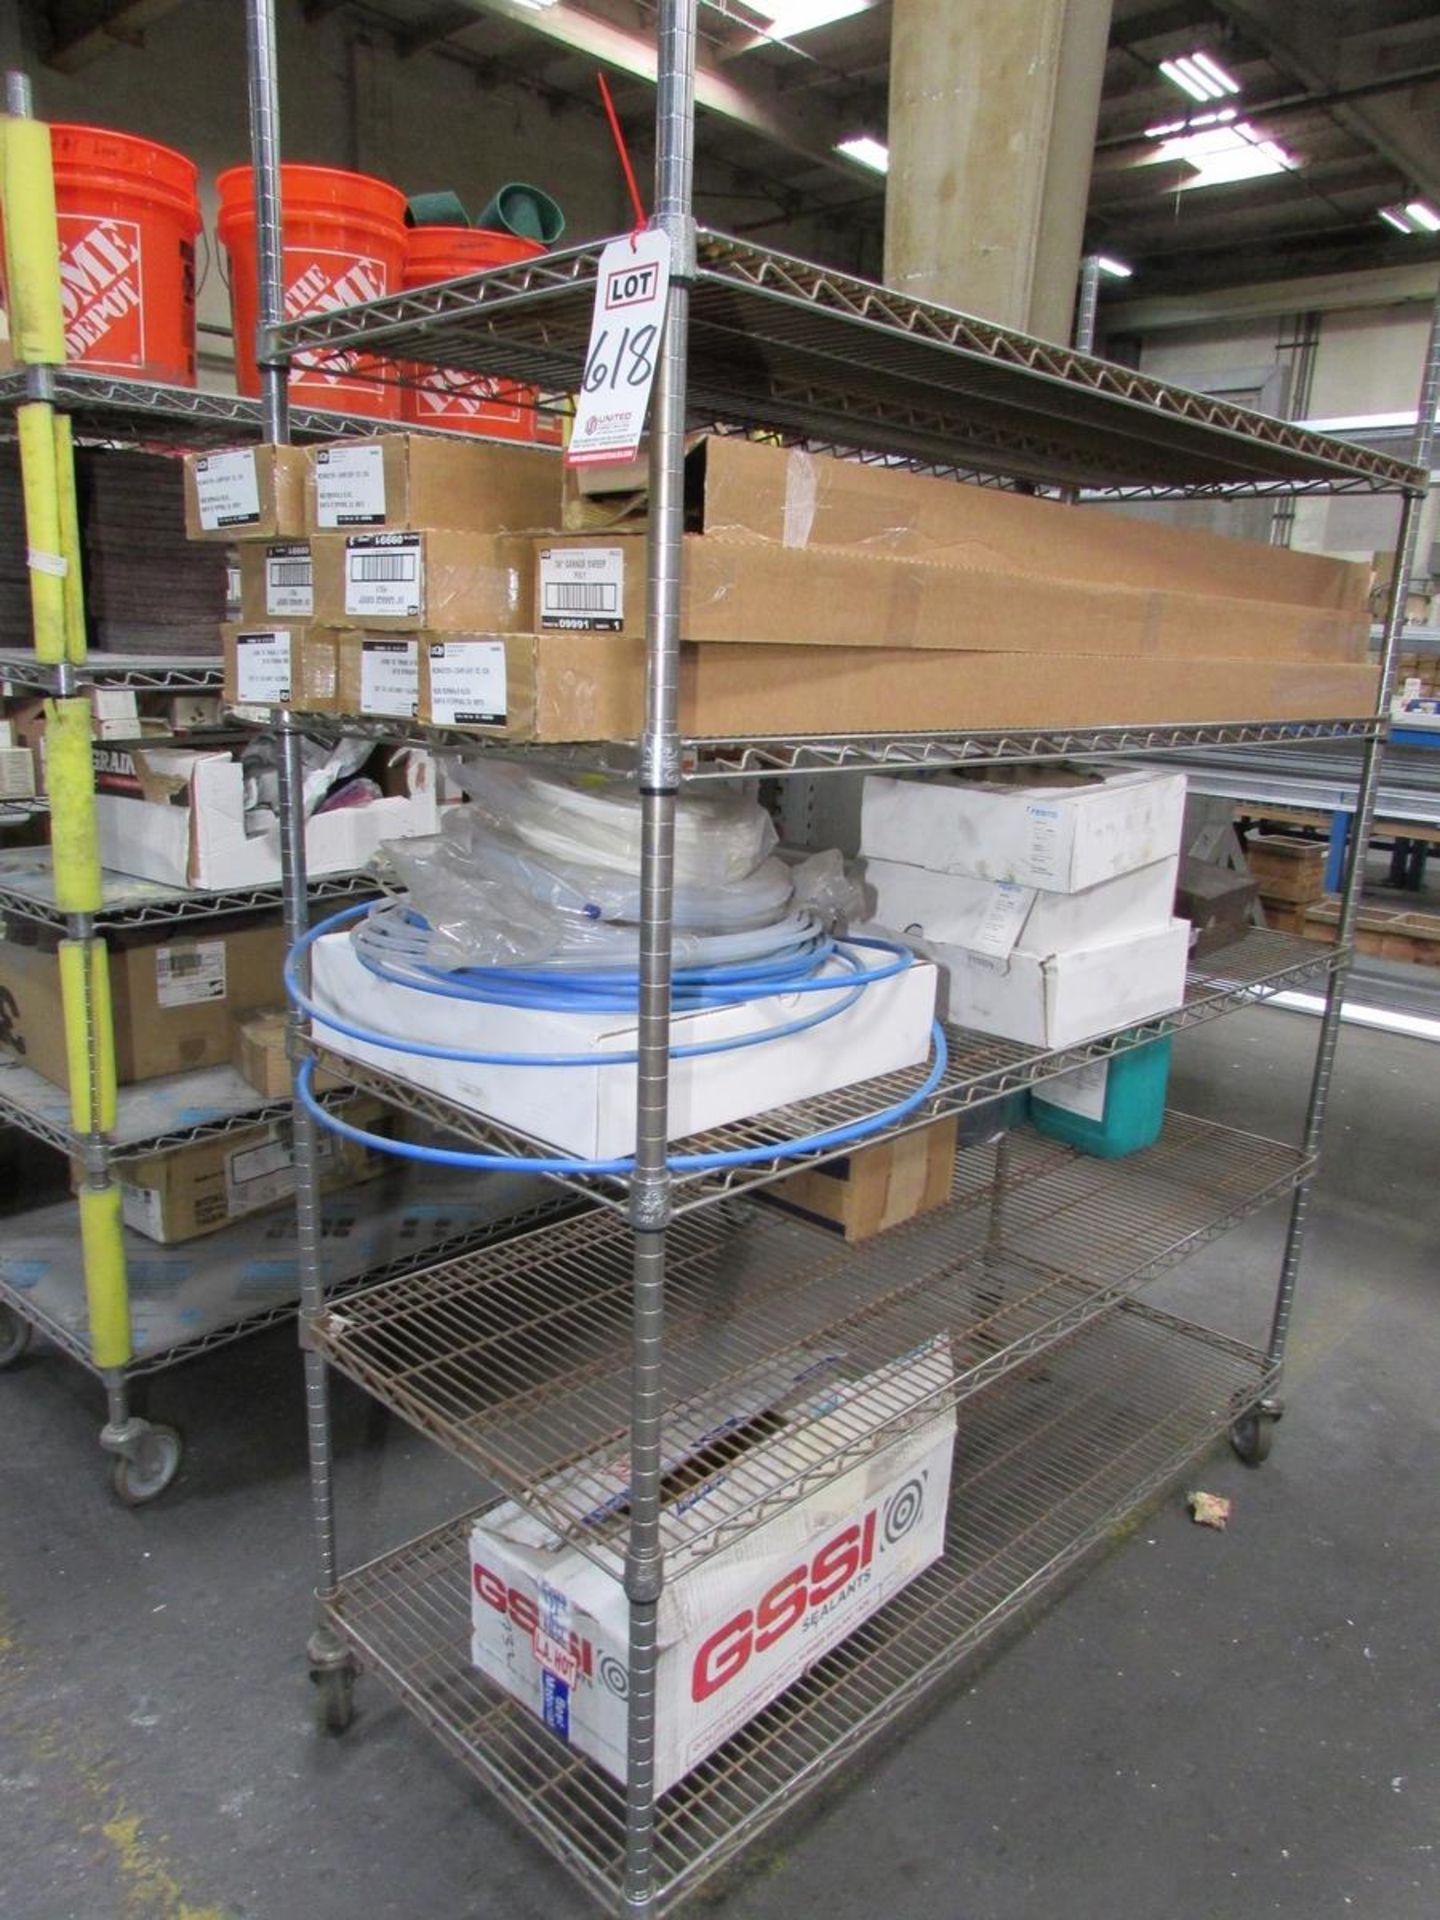 LOT - (5) NEXEL ROLLING WIRE RACKS, W/ CONTENTS: LARGE ASSORTMENT OF ABRASIVE CONSUMABLES - Image 2 of 15